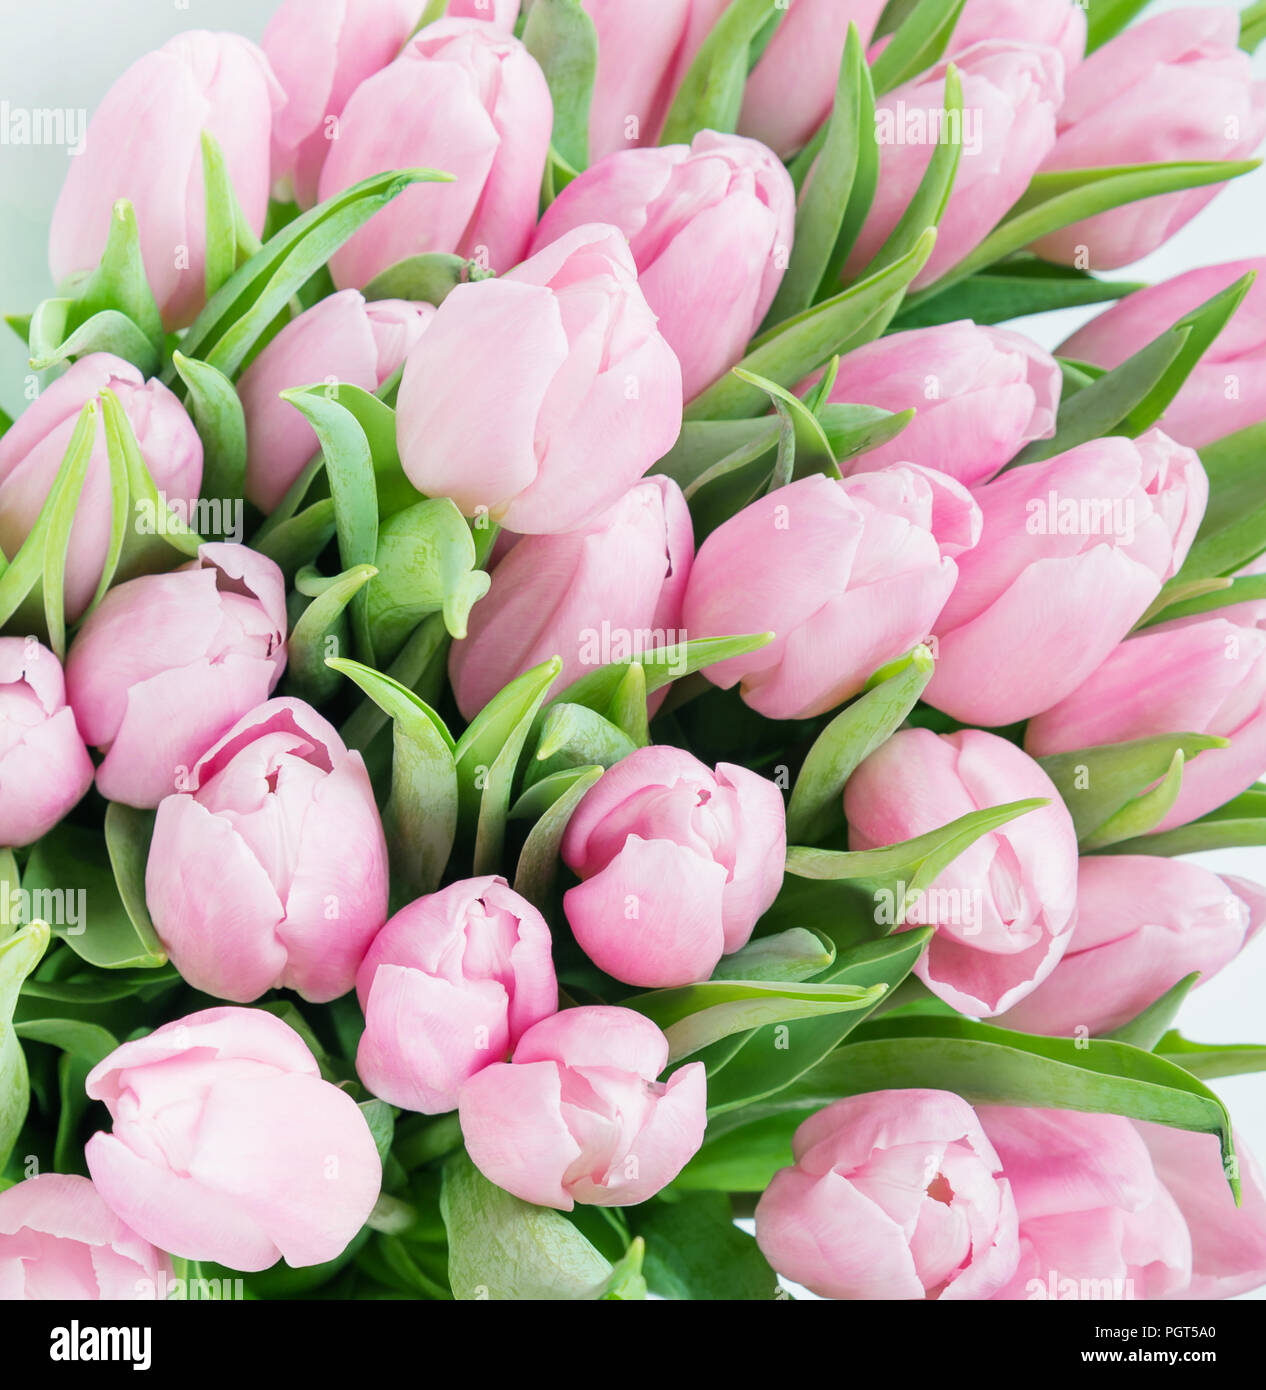 Huge bouquet of fresh pink tulips flowers close-up as beautiful natural  background Stock Photo - Alamy